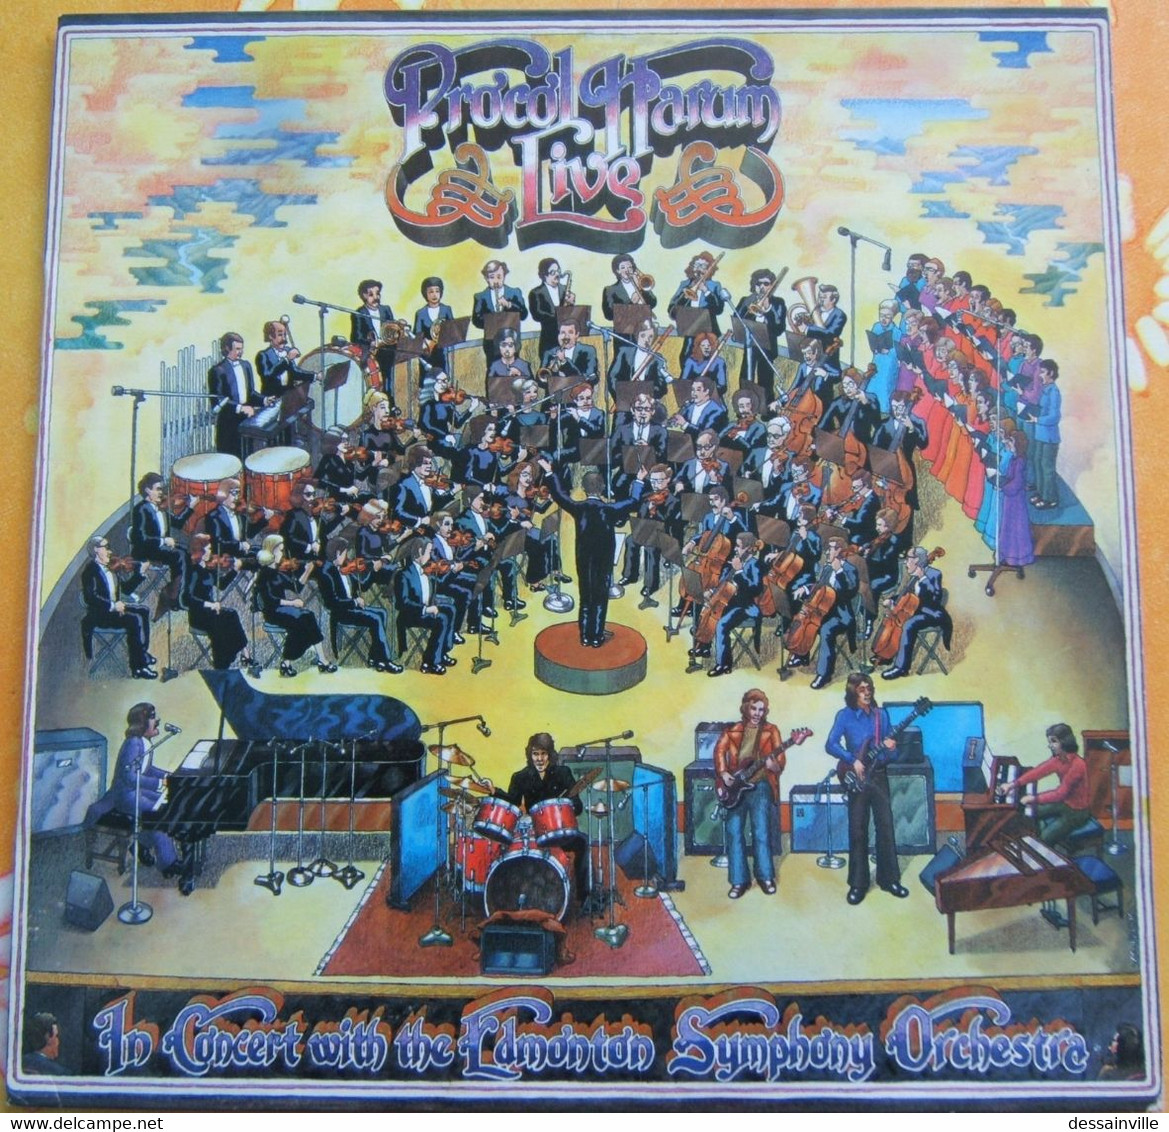 Pochette Seule - Groupe PROCOL HARUM Live - Accessories & Sleeves